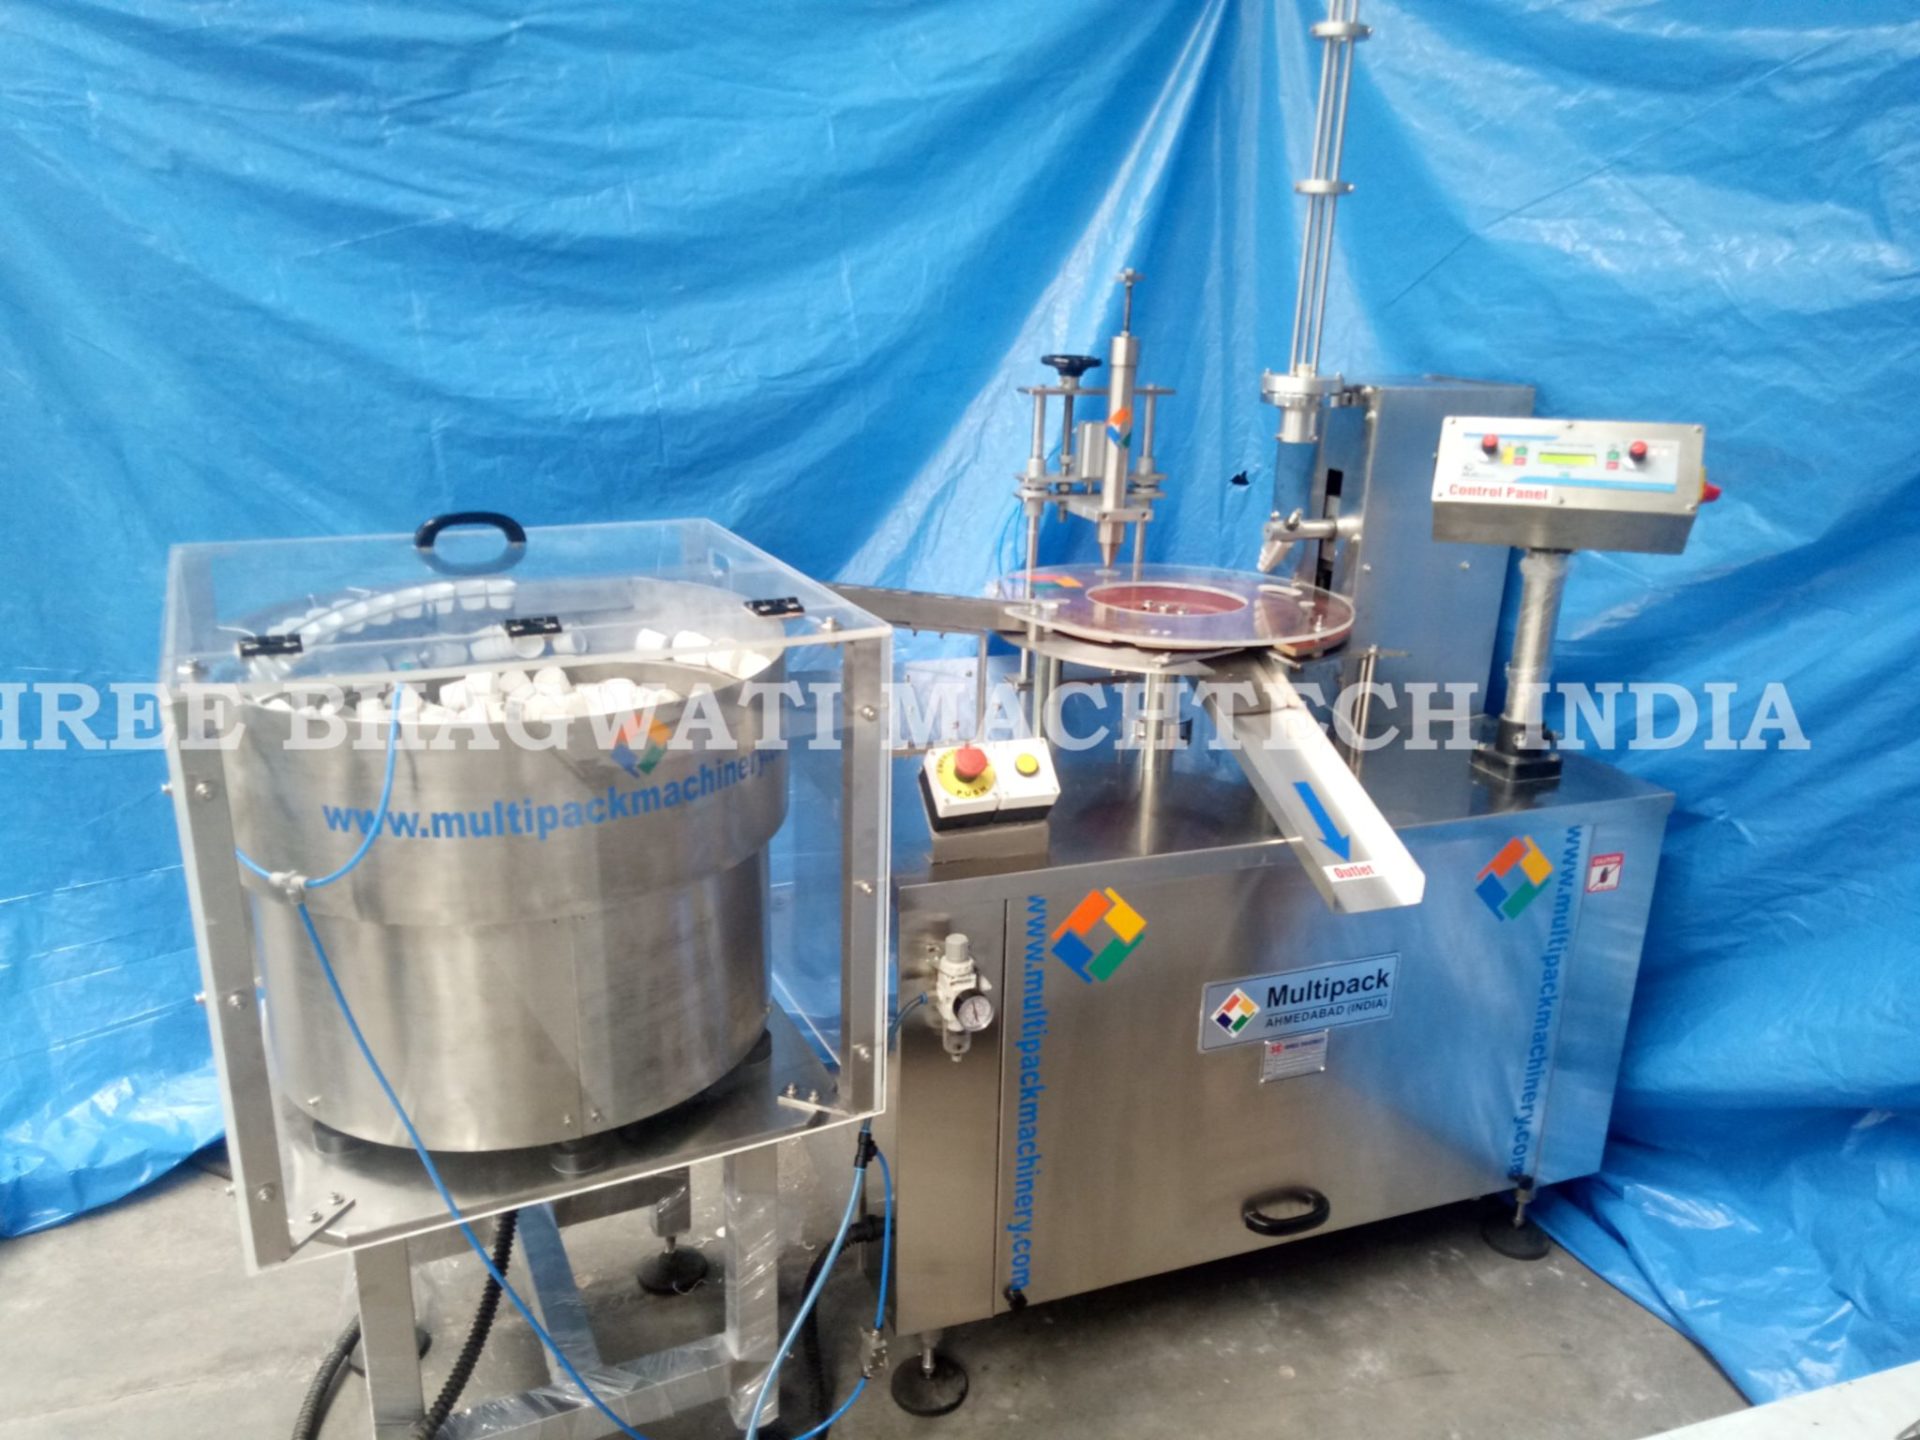 Cap lining machine with cap feeder enclosure specially designed for Hygienic and avoid any particle during cap wadding .